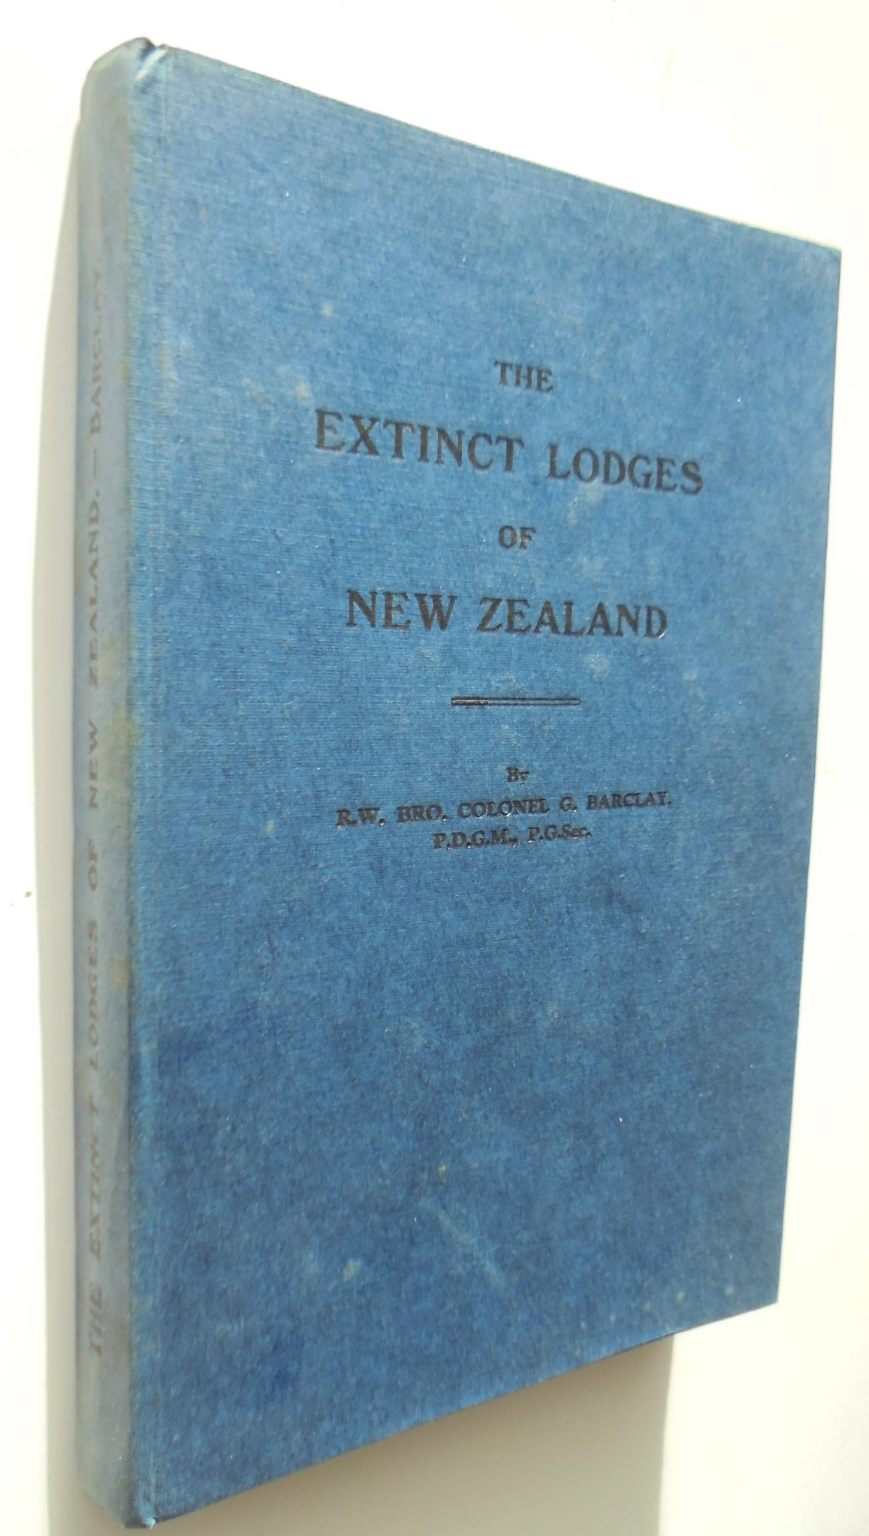 The Extinct Lodges of New Zealand By R. W. Bro. Colonel G. Barclay. SIGNED BY AUTHOR. Inscribed to previous owner.